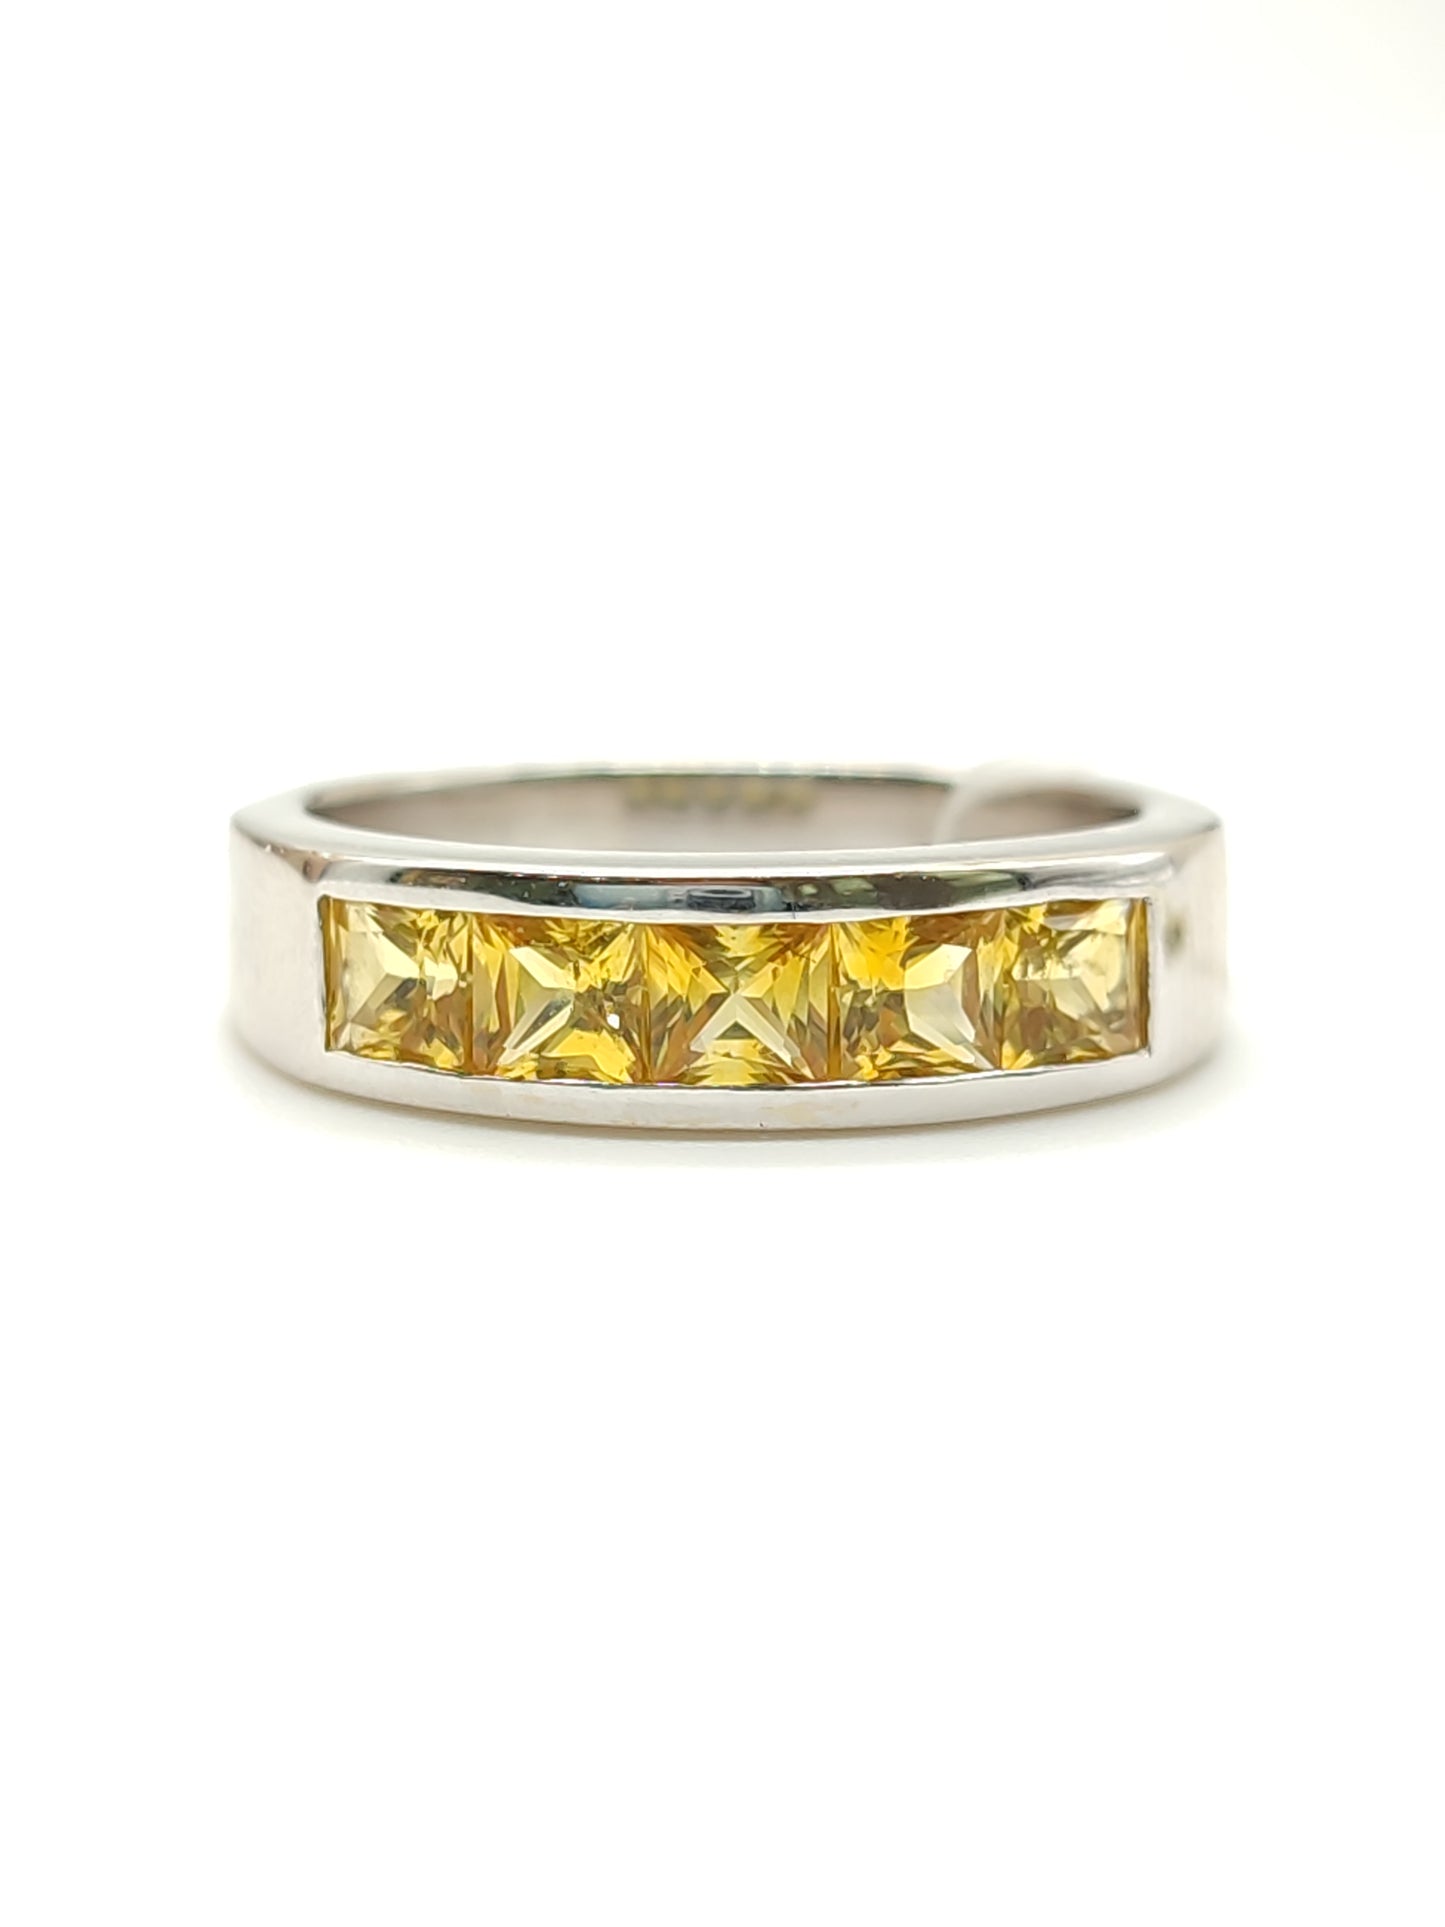 Pavan - Half wedding band in gold with yellow sapphires